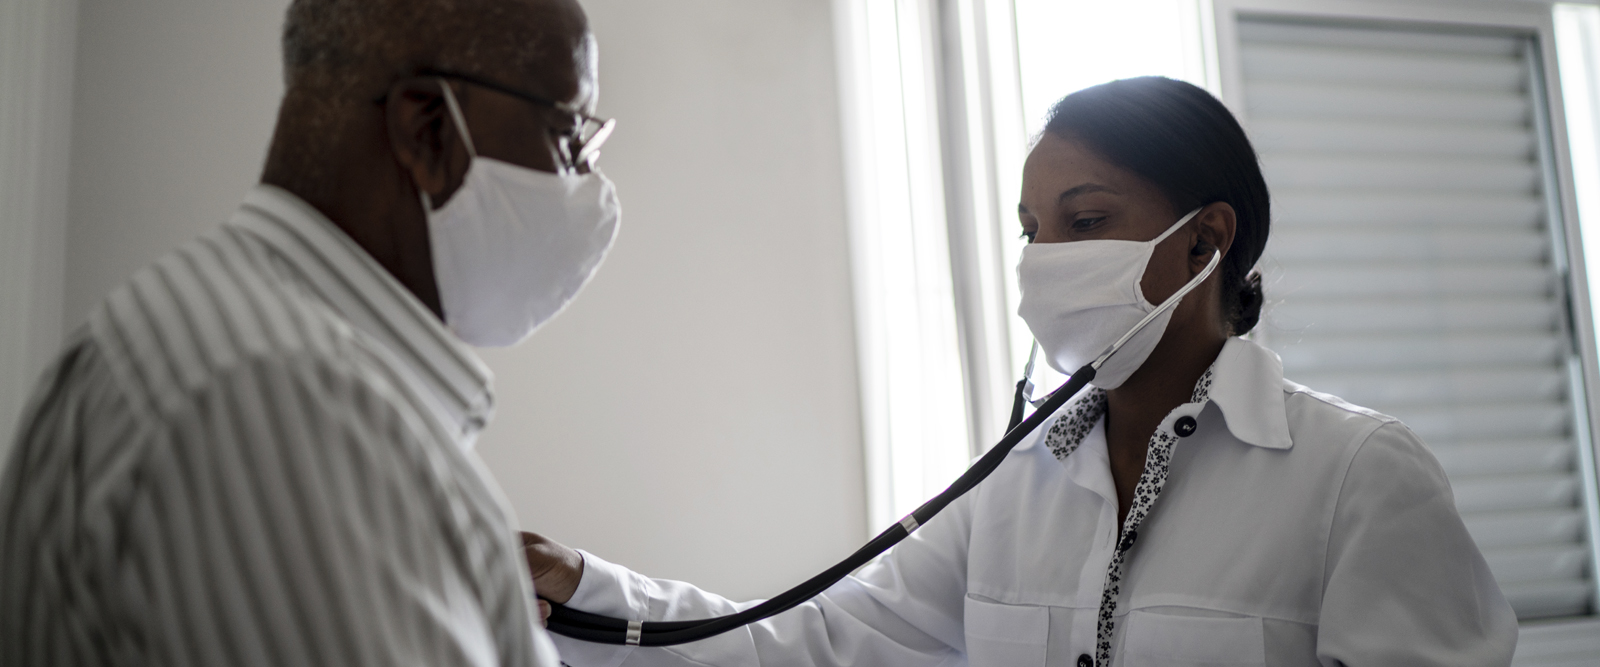 A doctor and patient discussing heart disease and African Americans